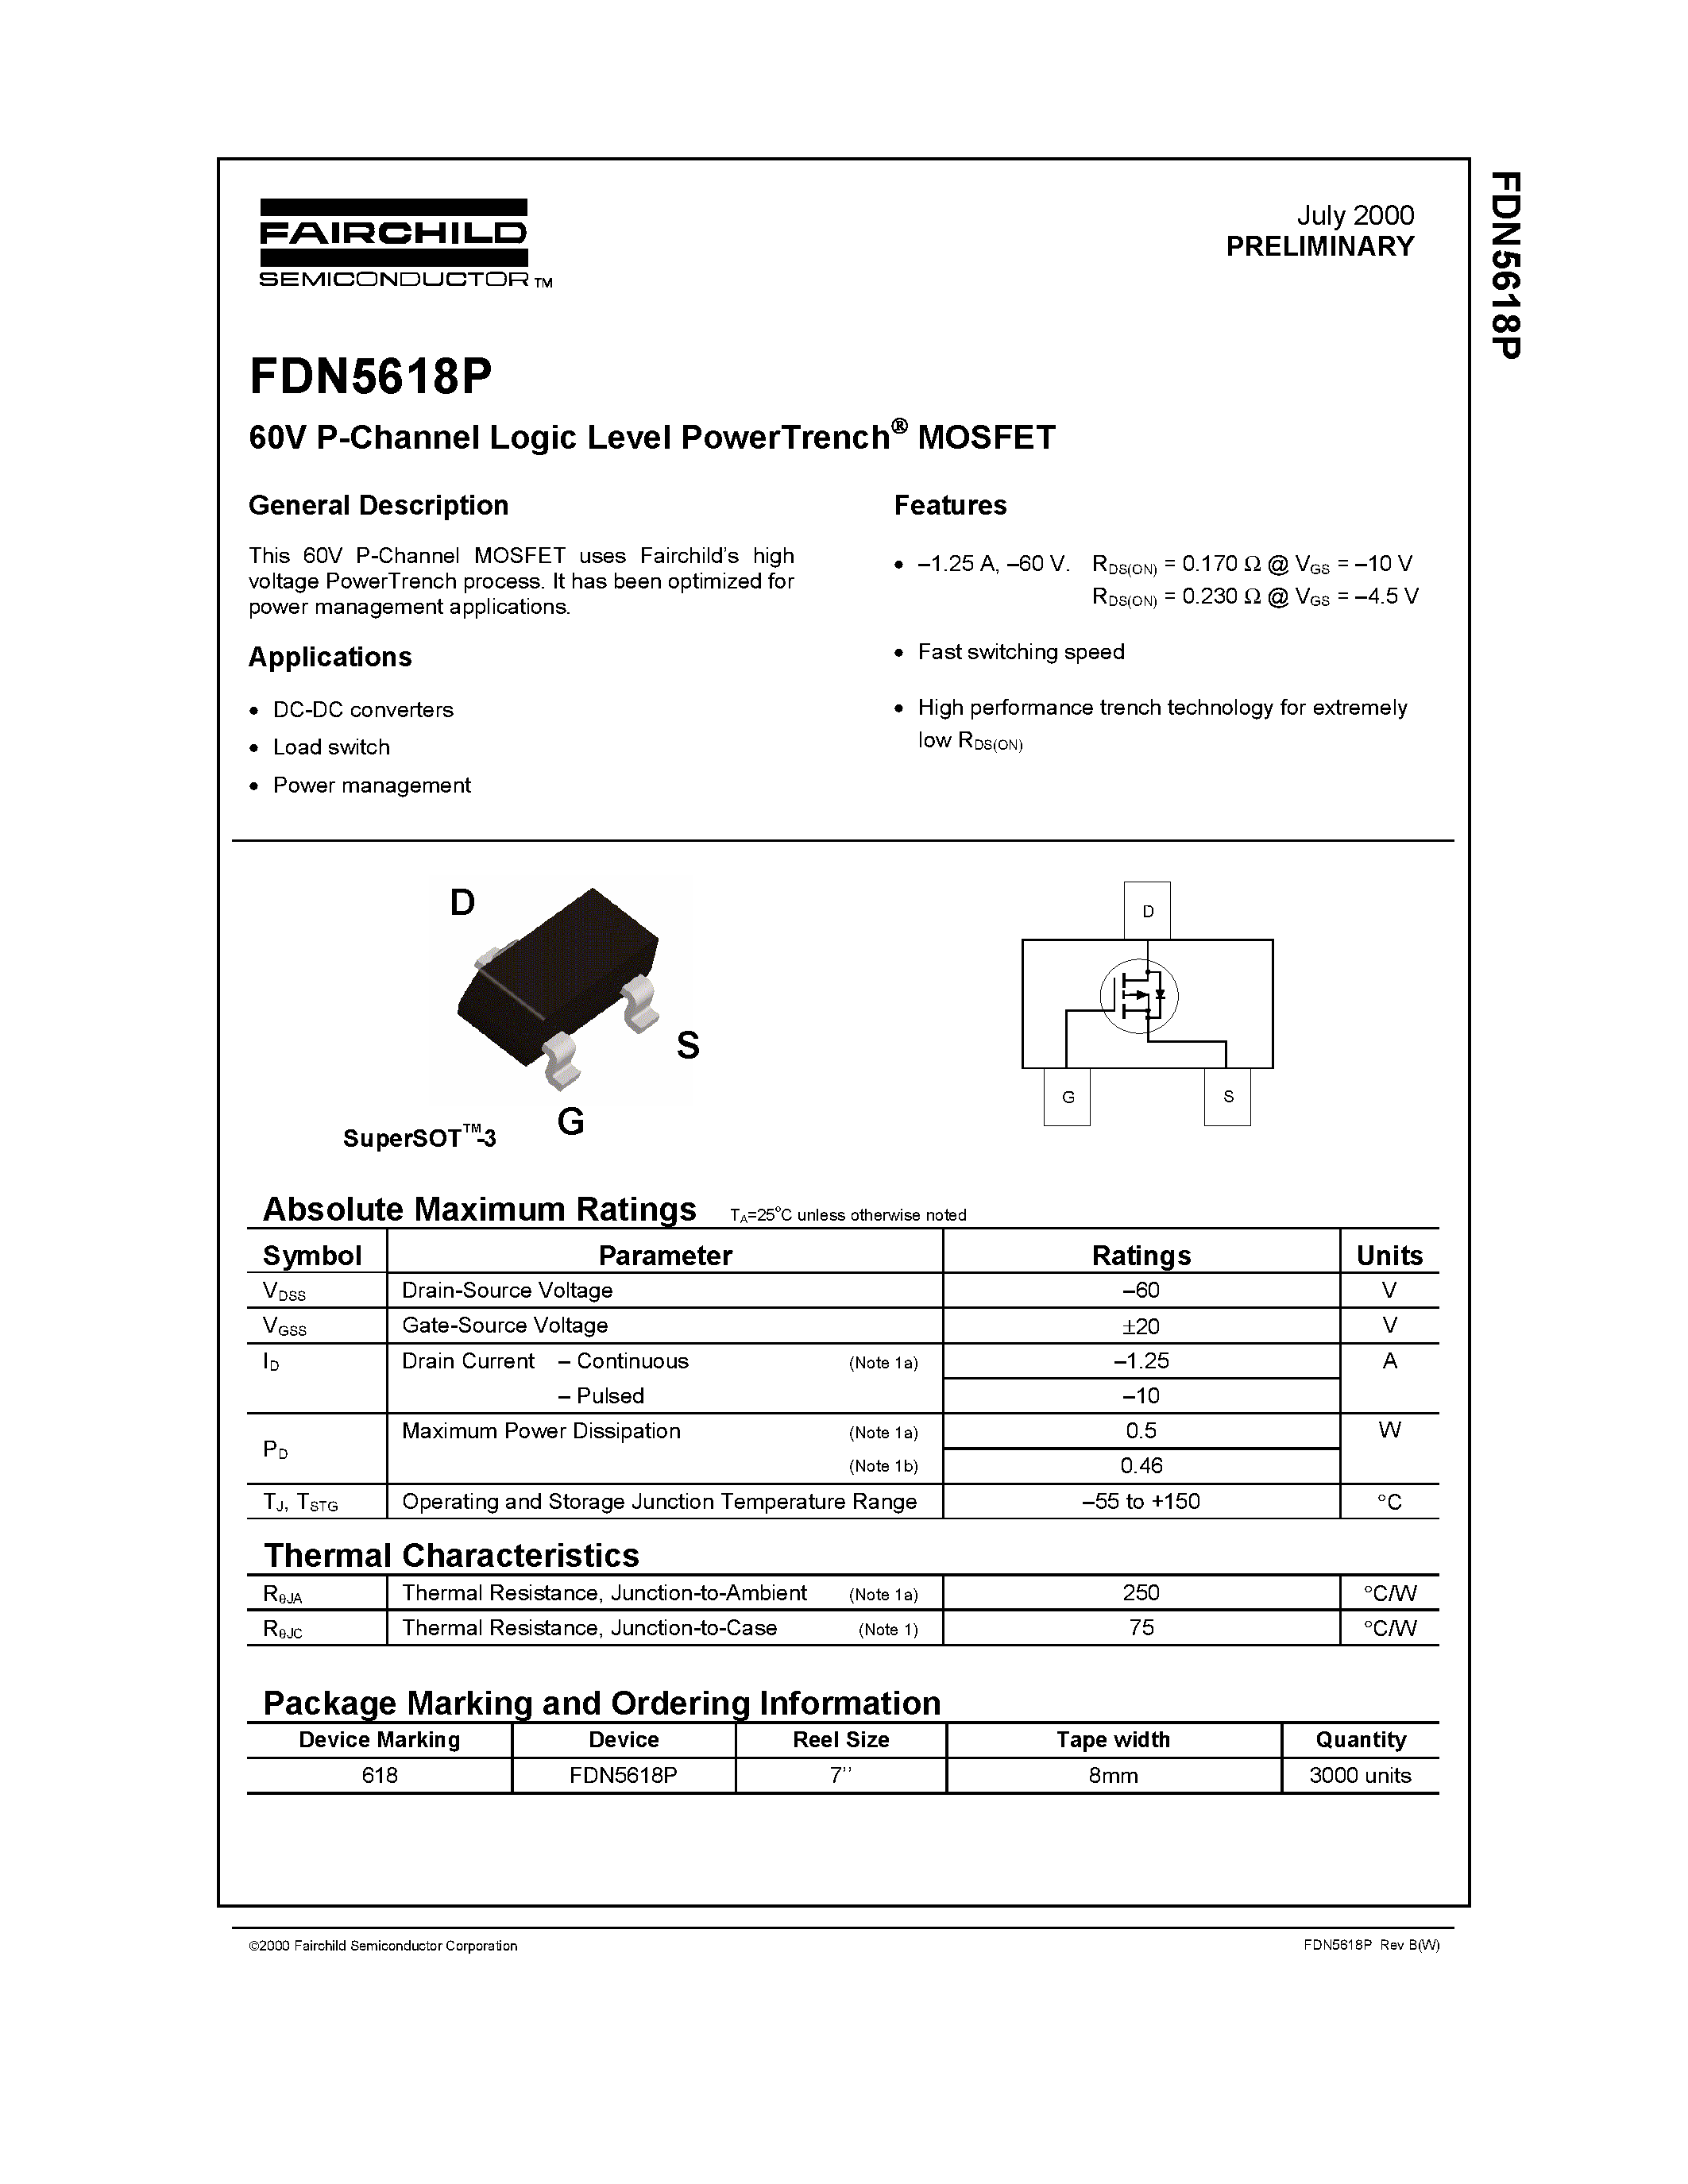 Даташит FDN5618P - 60V P-Channel Logic Level PowerTrench MOSFET страница 1